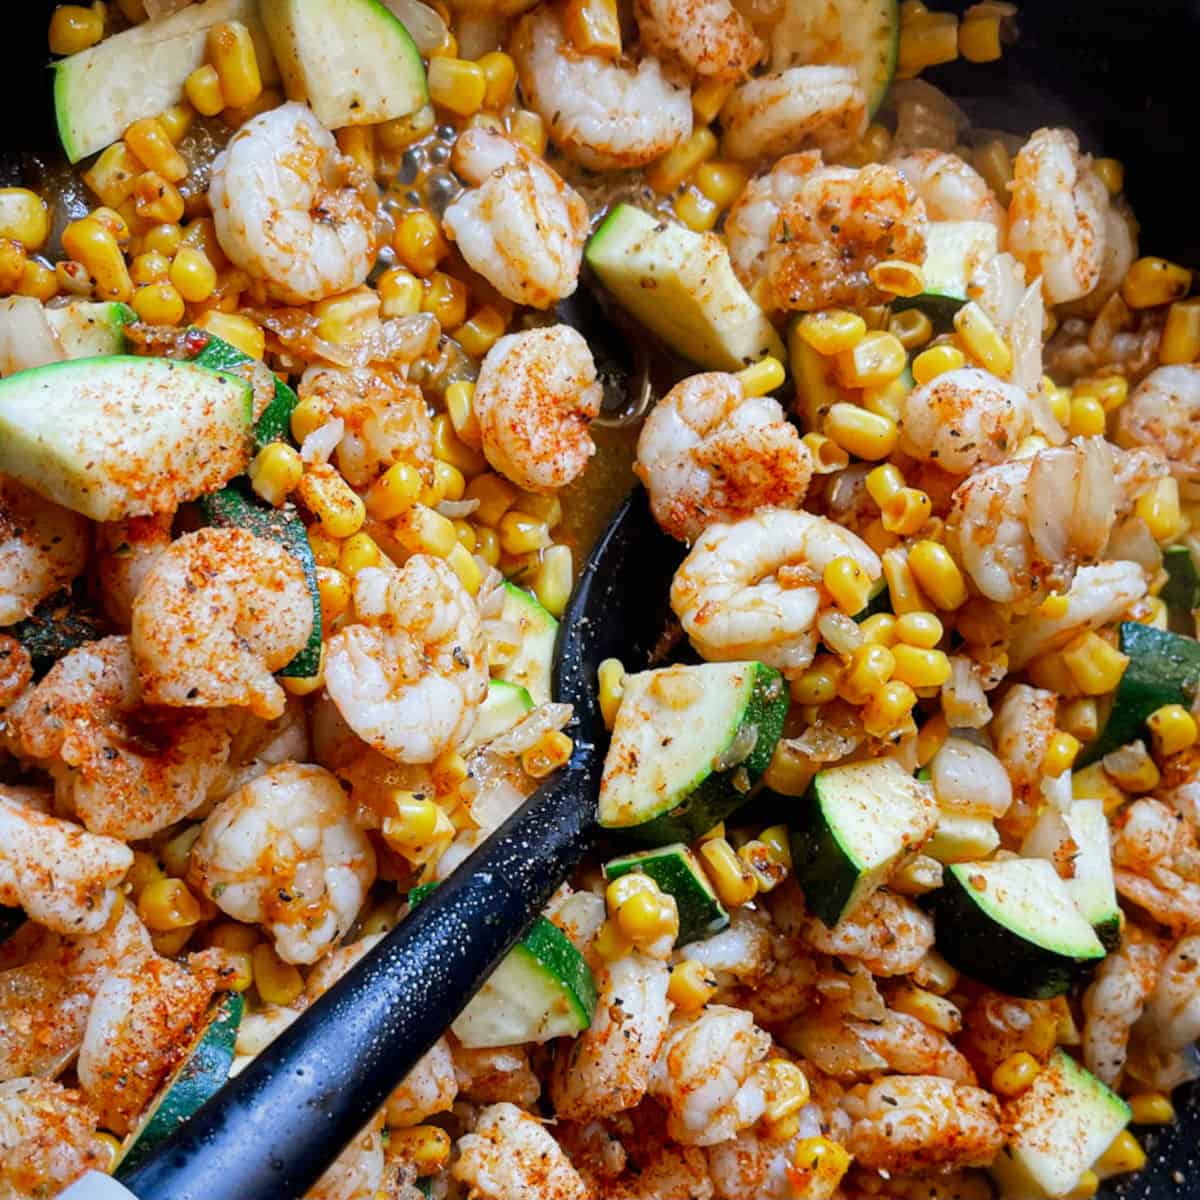 a skillet cooking shrimp, zucchini and corn seasoned with cajun spices with a black cooking spoon taking a spoonful